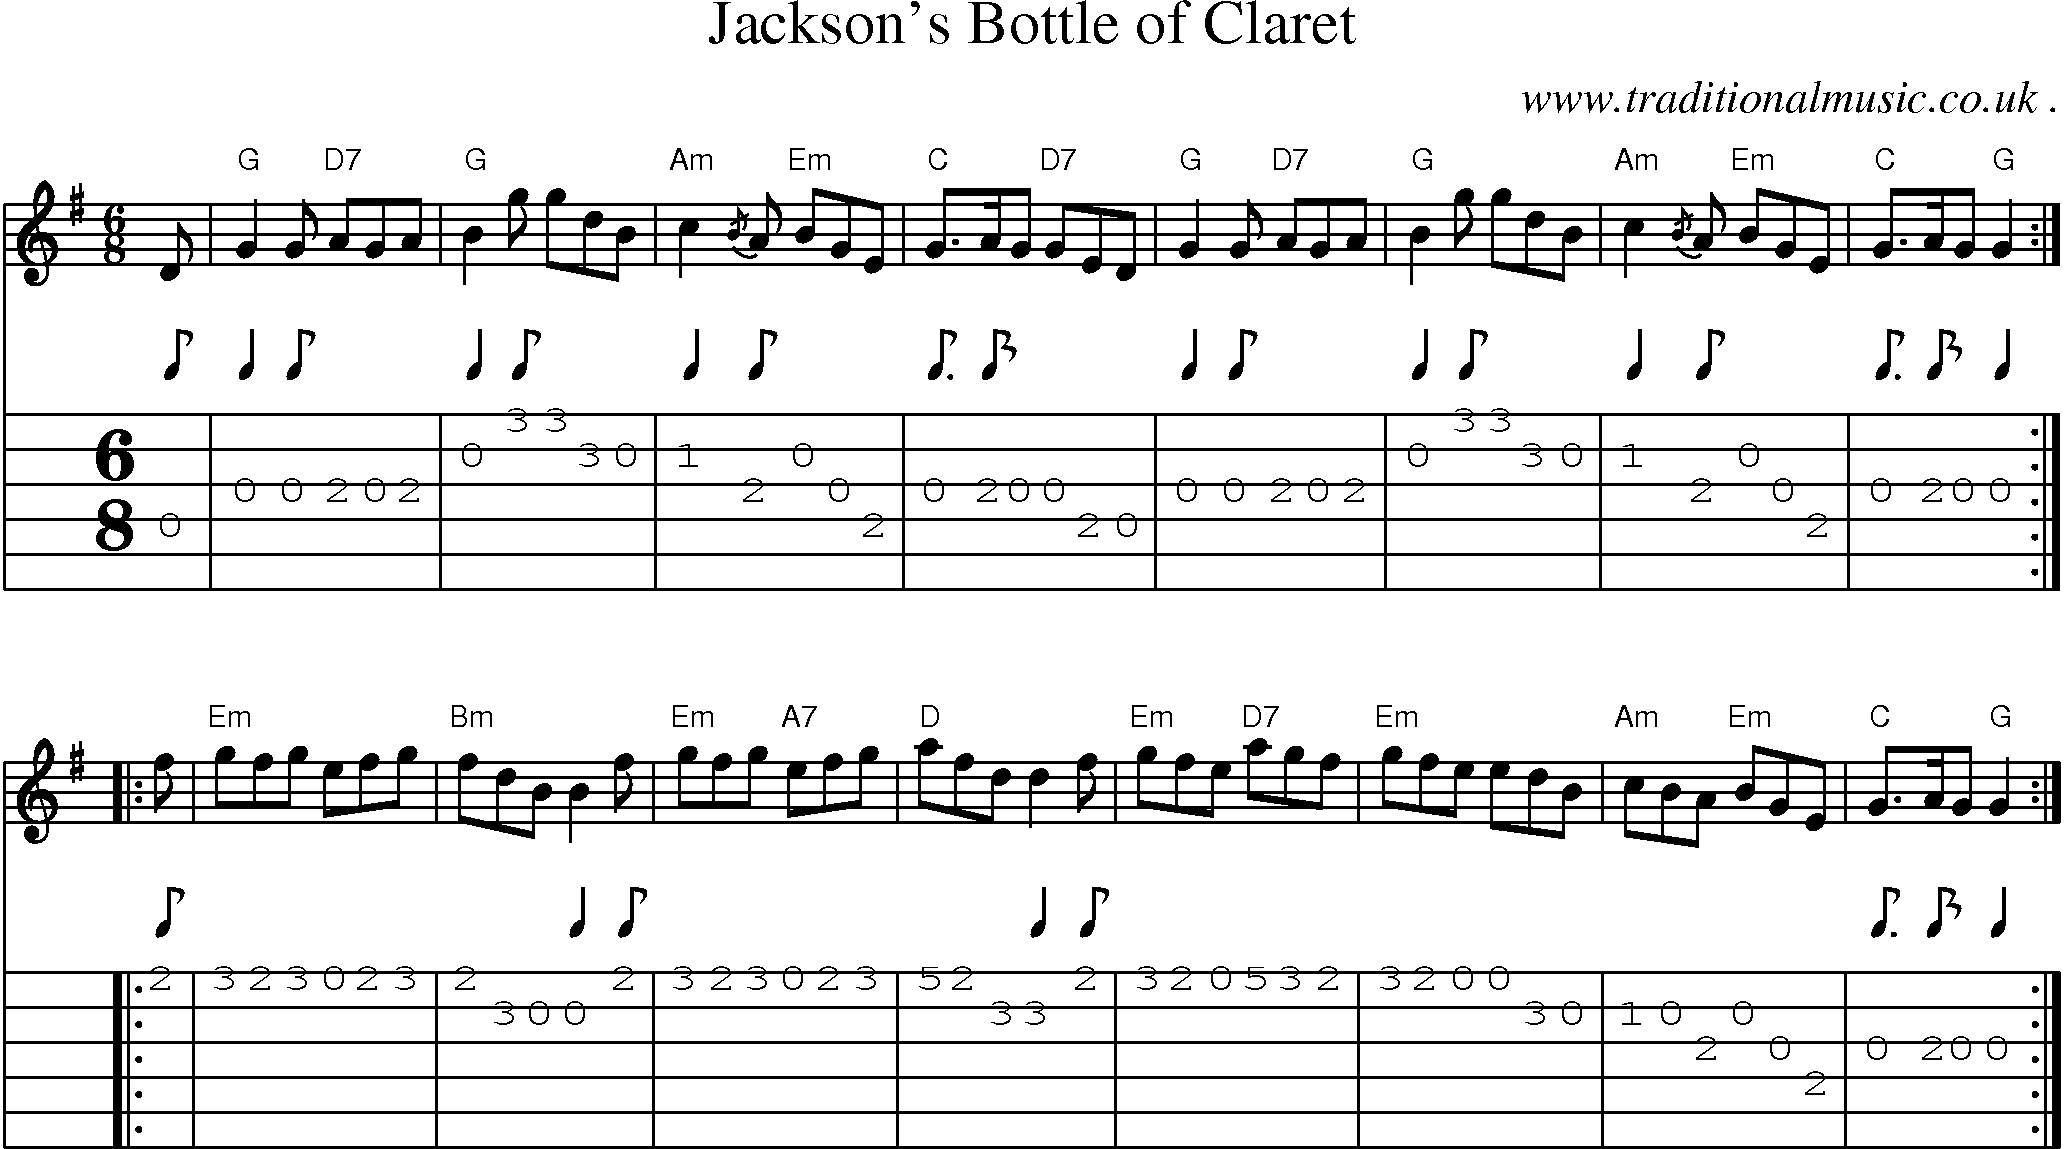 Sheet-music  score, Chords and Guitar Tabs for Jacksons Bottle Of Claret